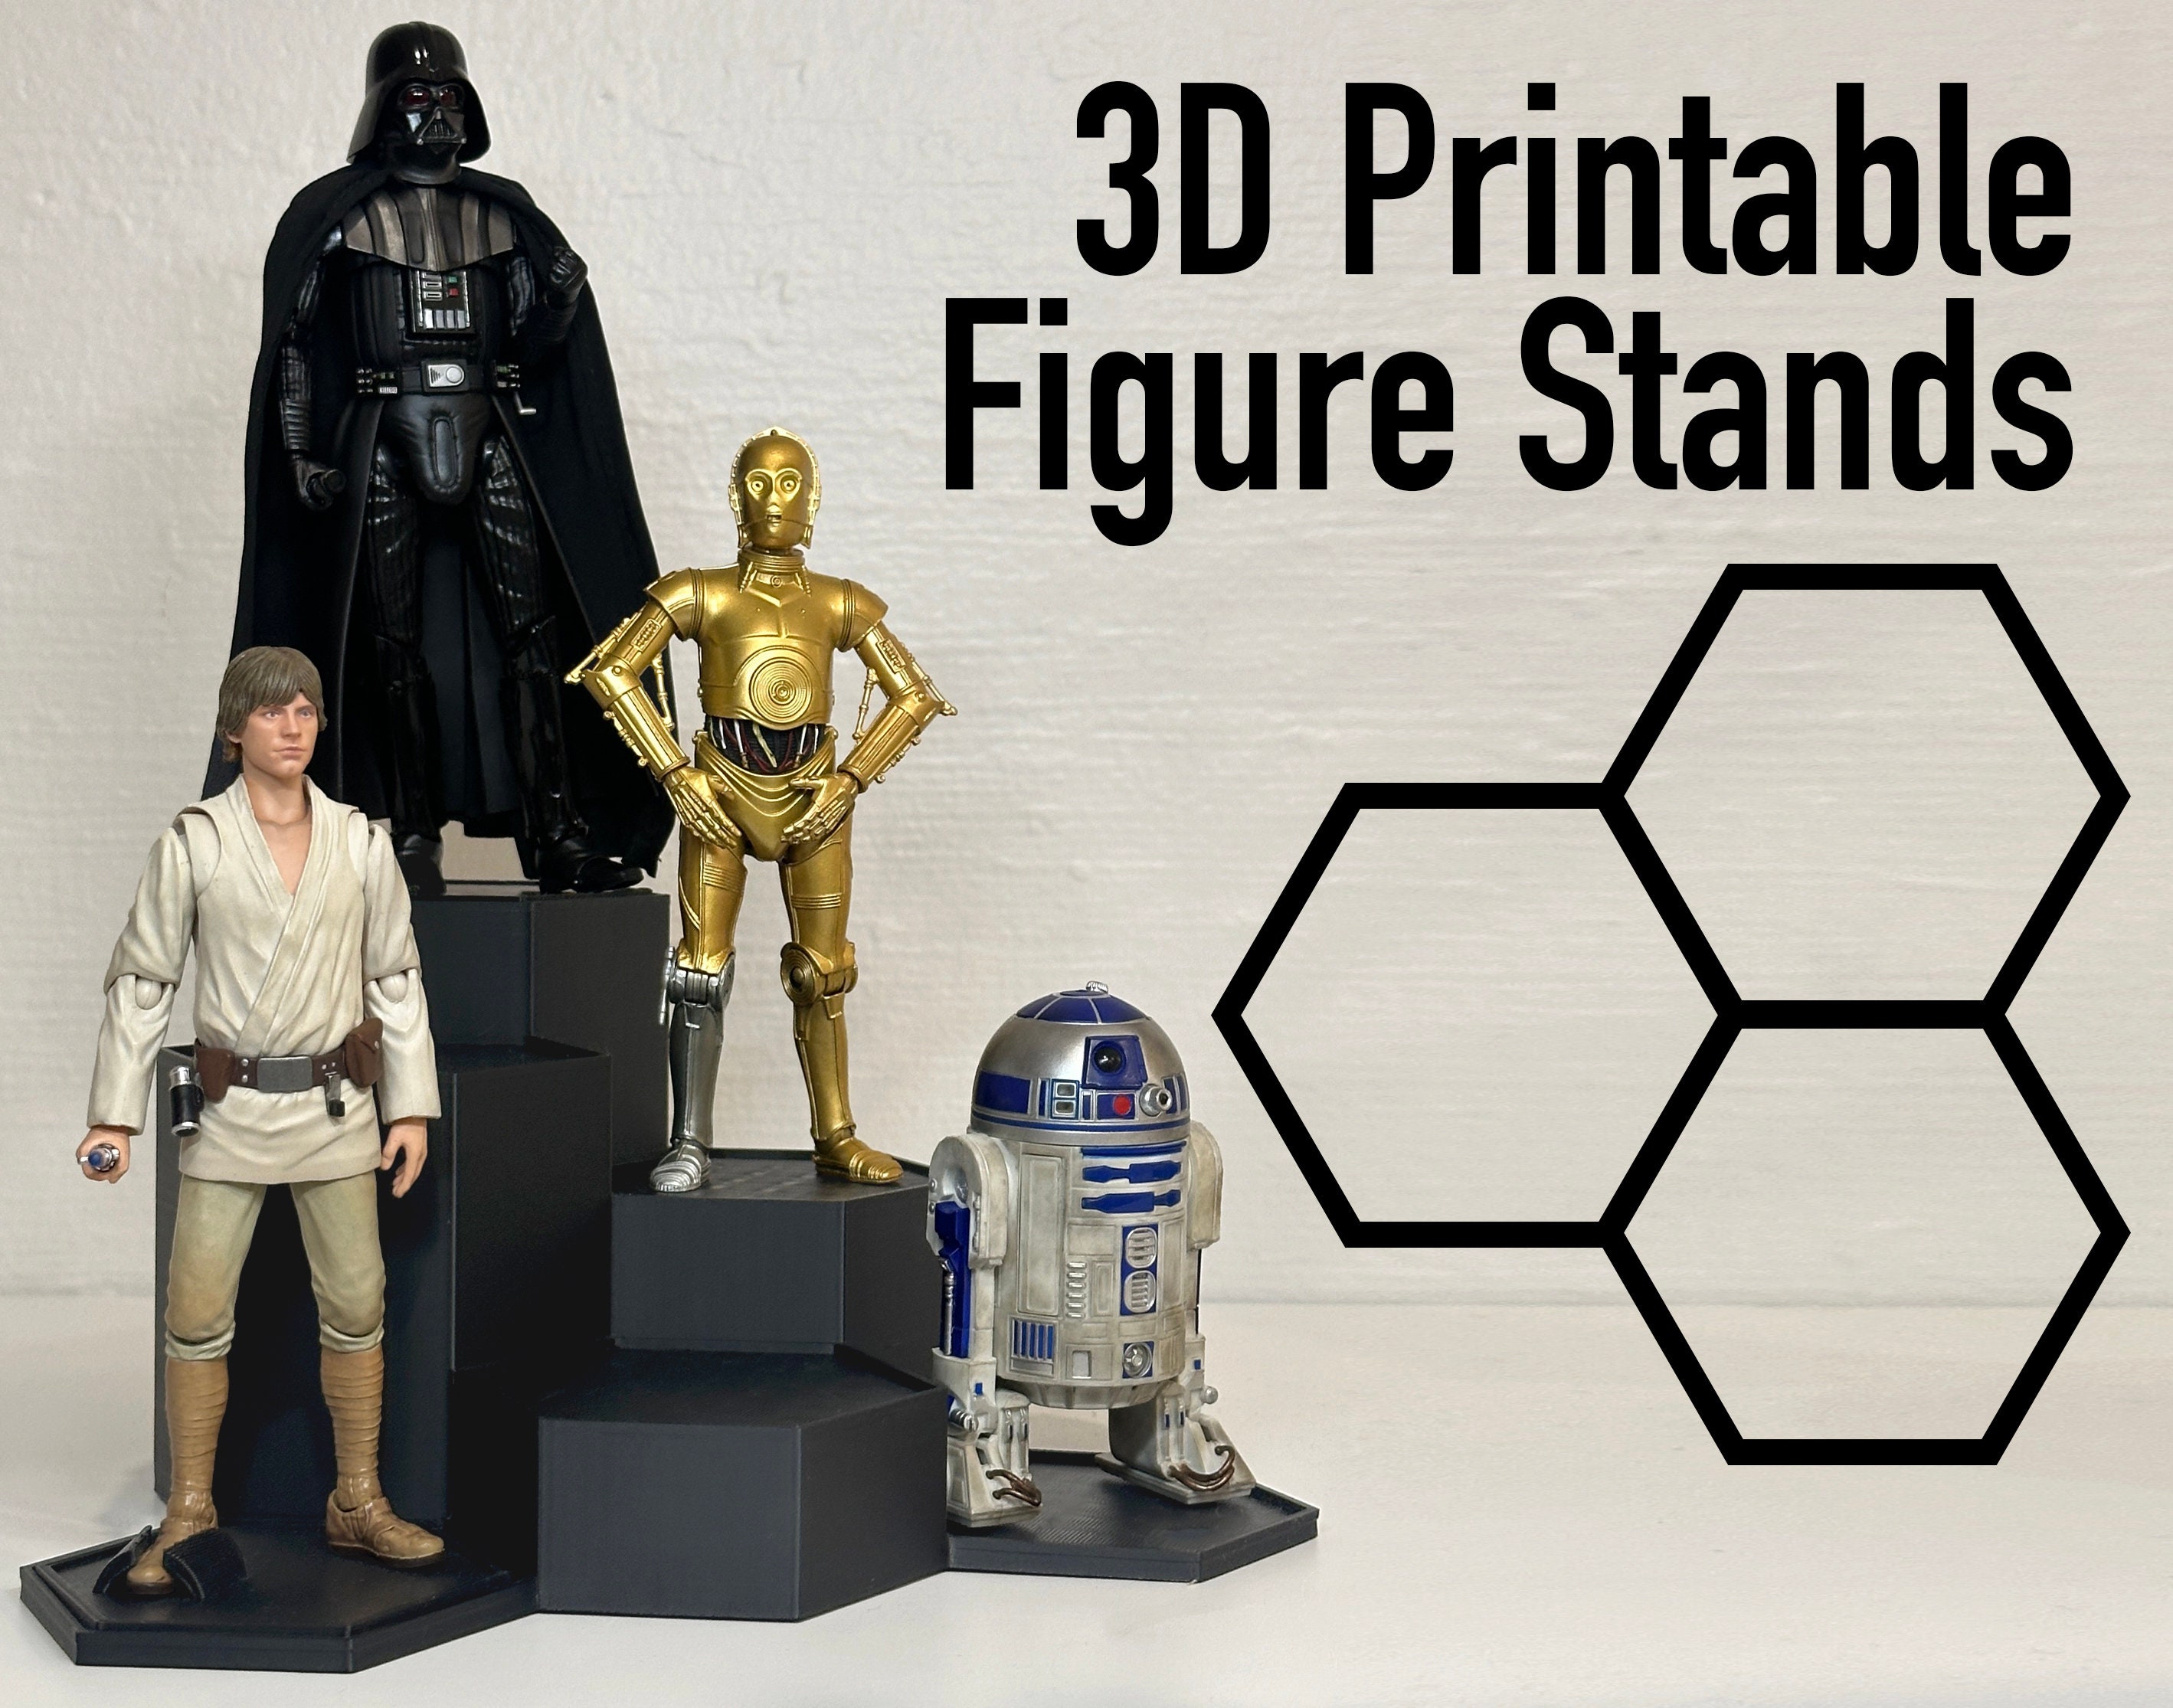 Poseable Action Figure Stands 3 Pack